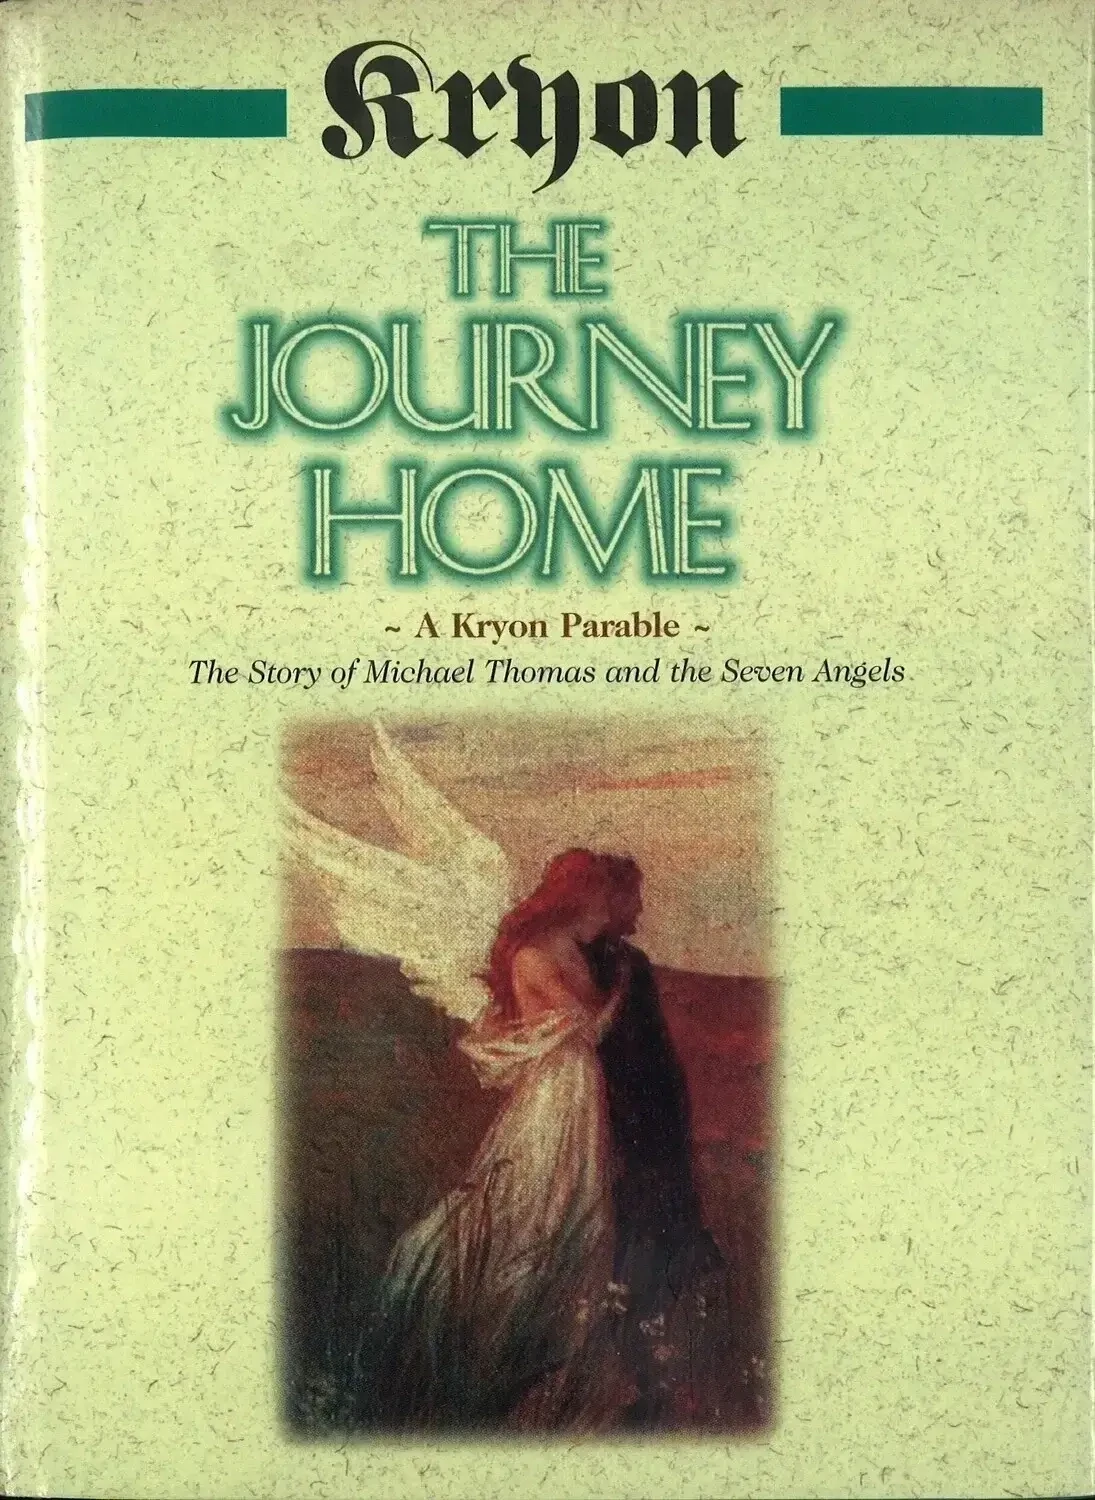 The Journey Home - A Kryon Parable by Lee Carroll